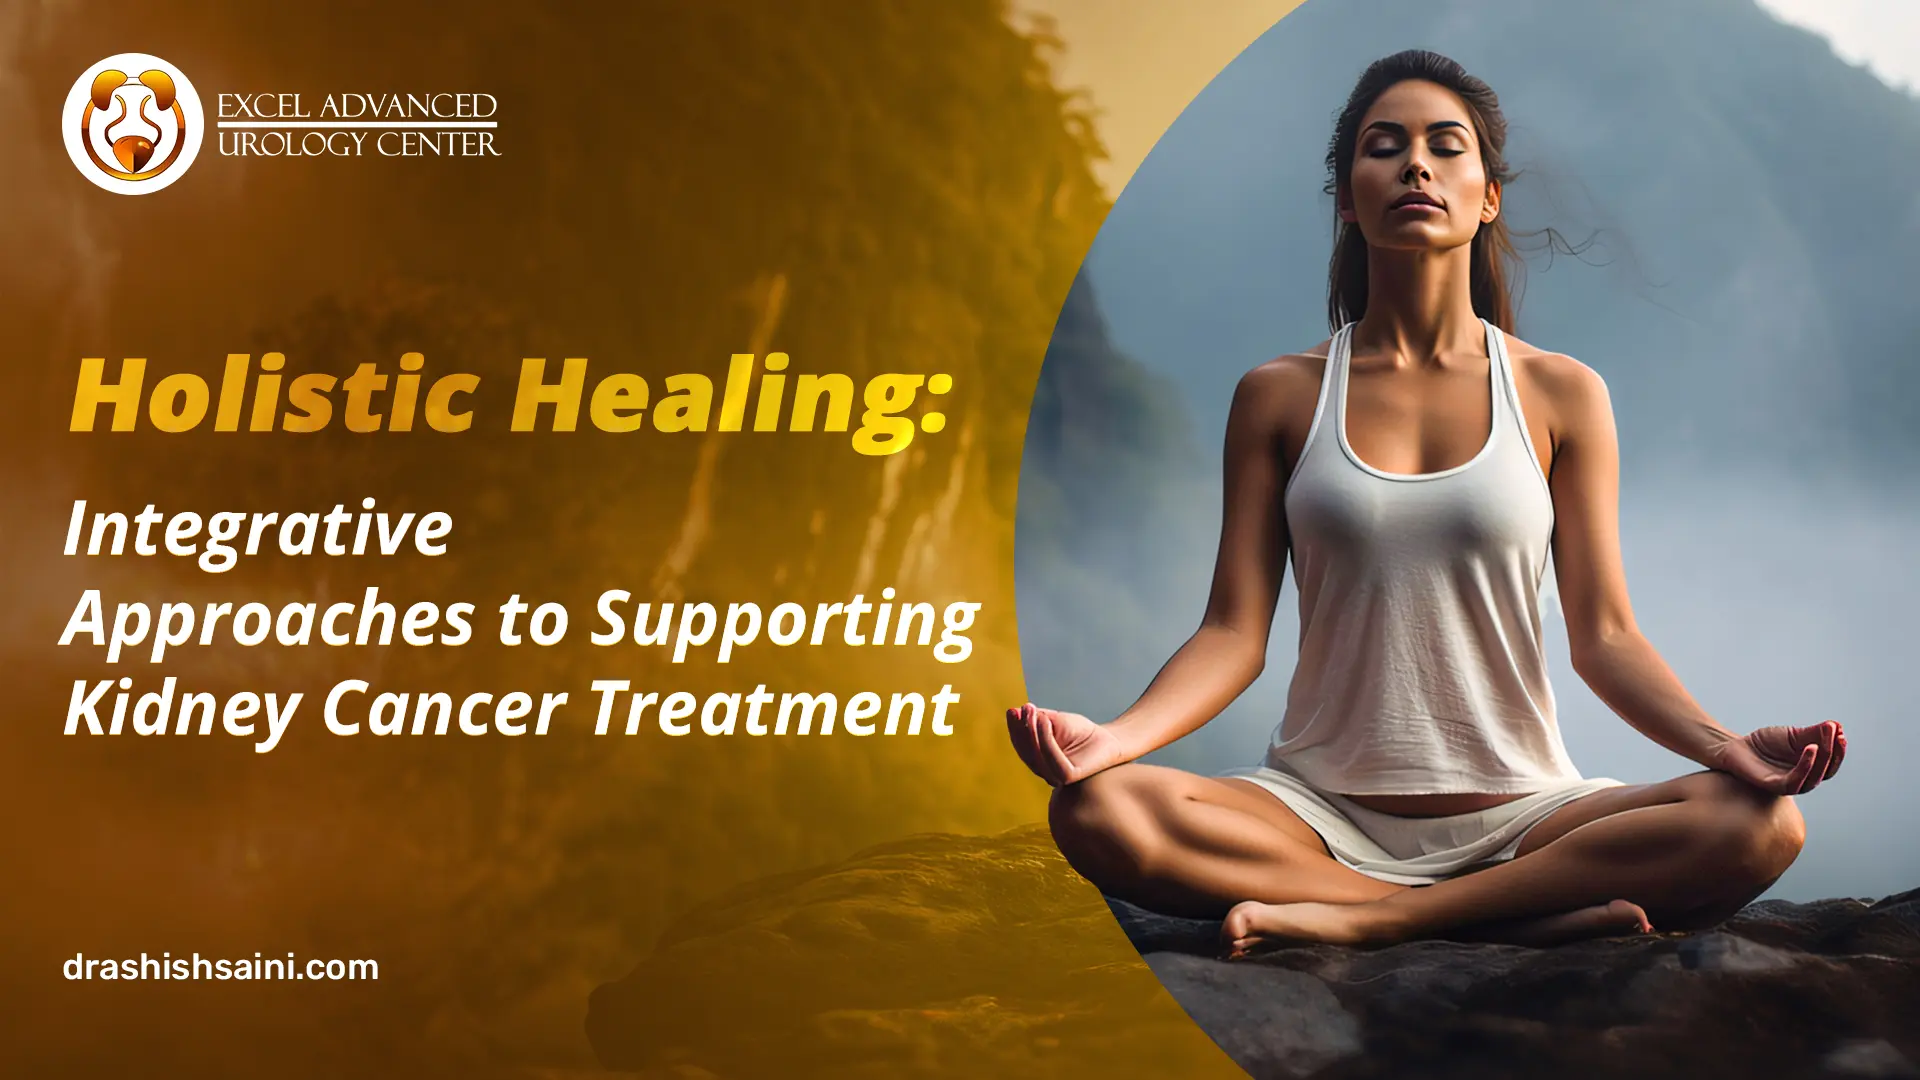 Holistic Healing: Integrative Approaches to Supporting Kidney Cancer Treatment